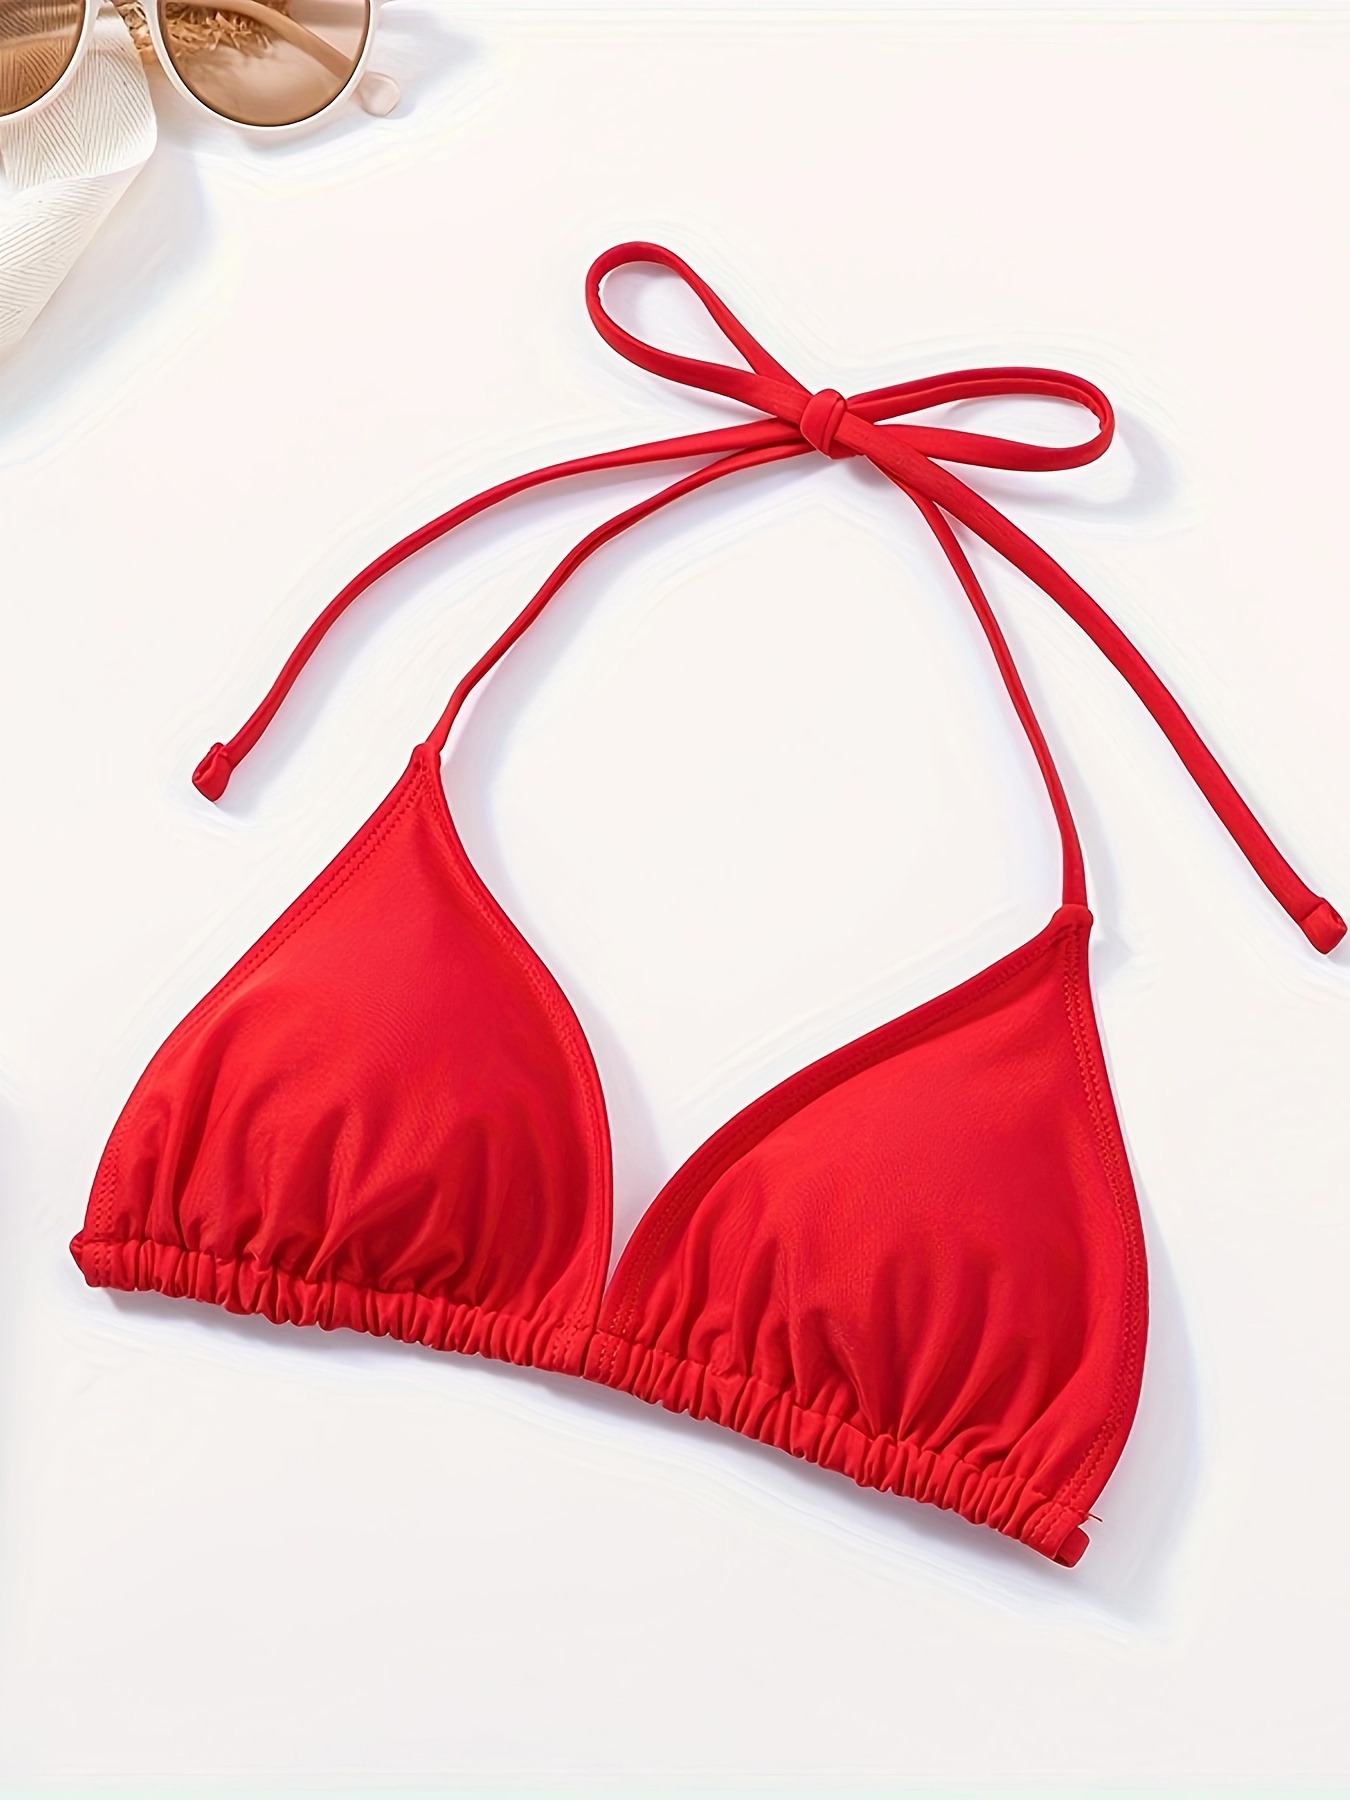 Solid Color Sexy Bikini Top, V Neck Tie Front Stretchy Swimming Top Bra,  Women's Swimwear & Clothing